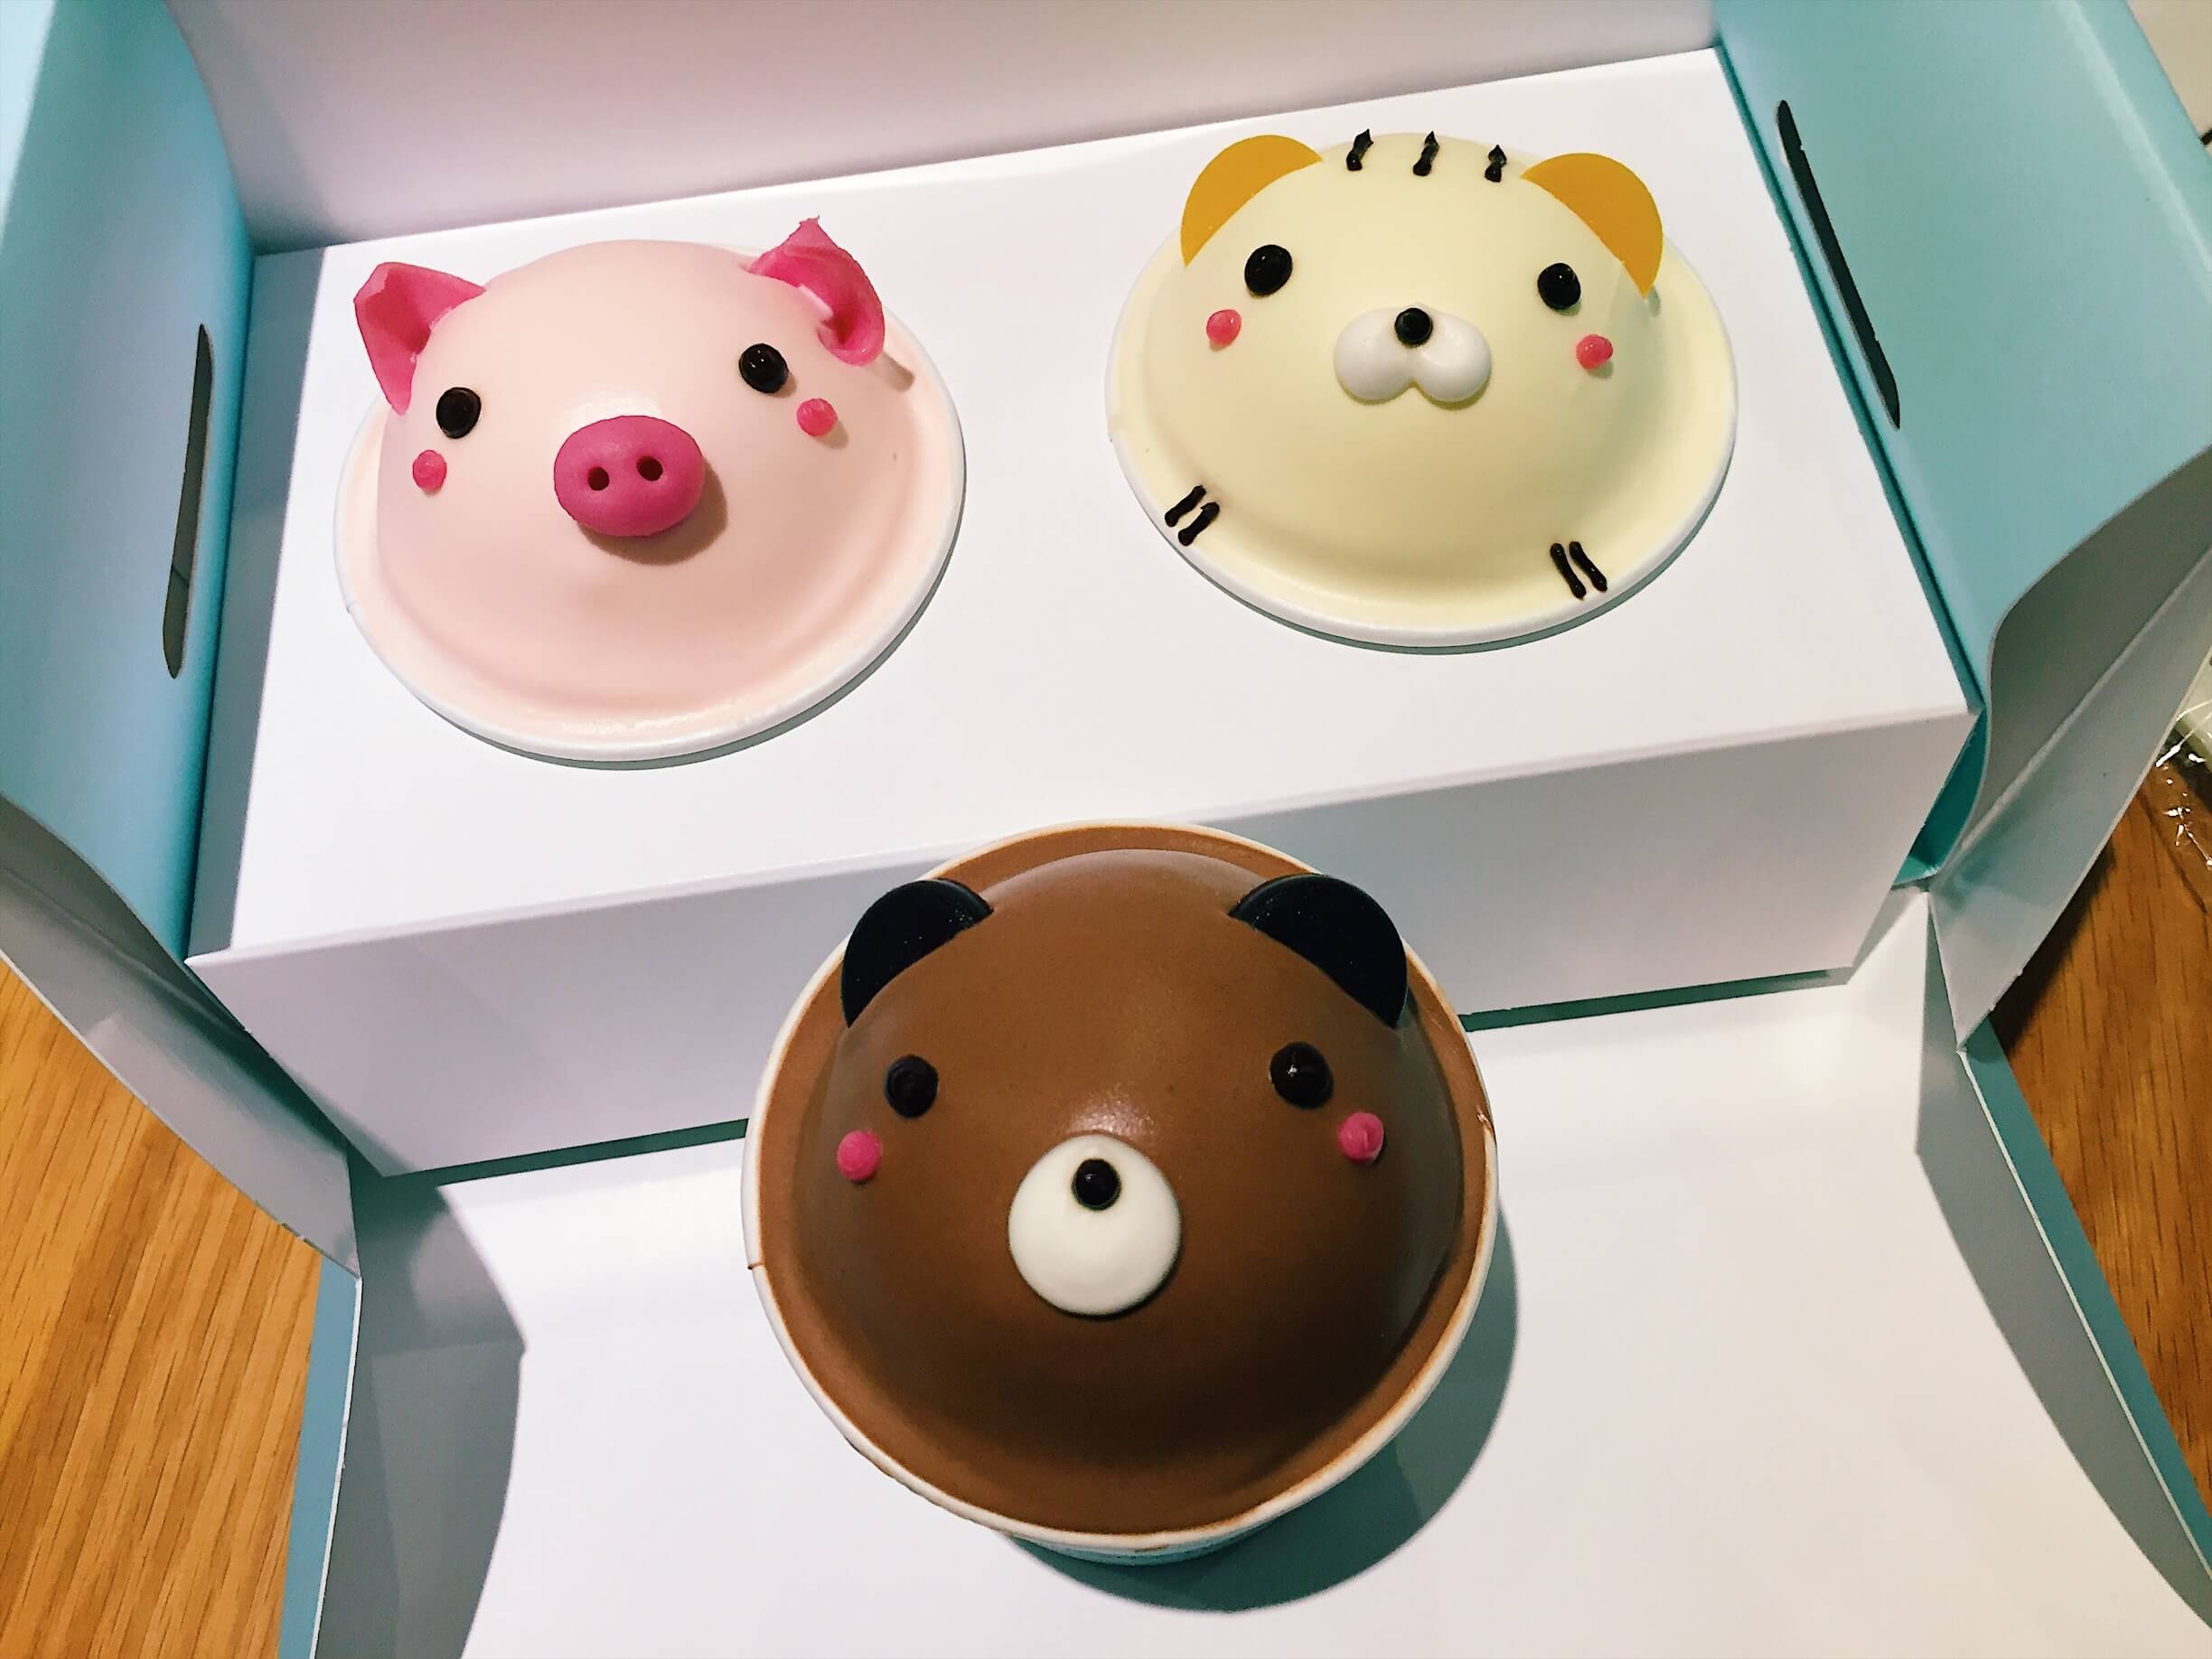 Cute little round cakes that are
              decorated to look like animals.